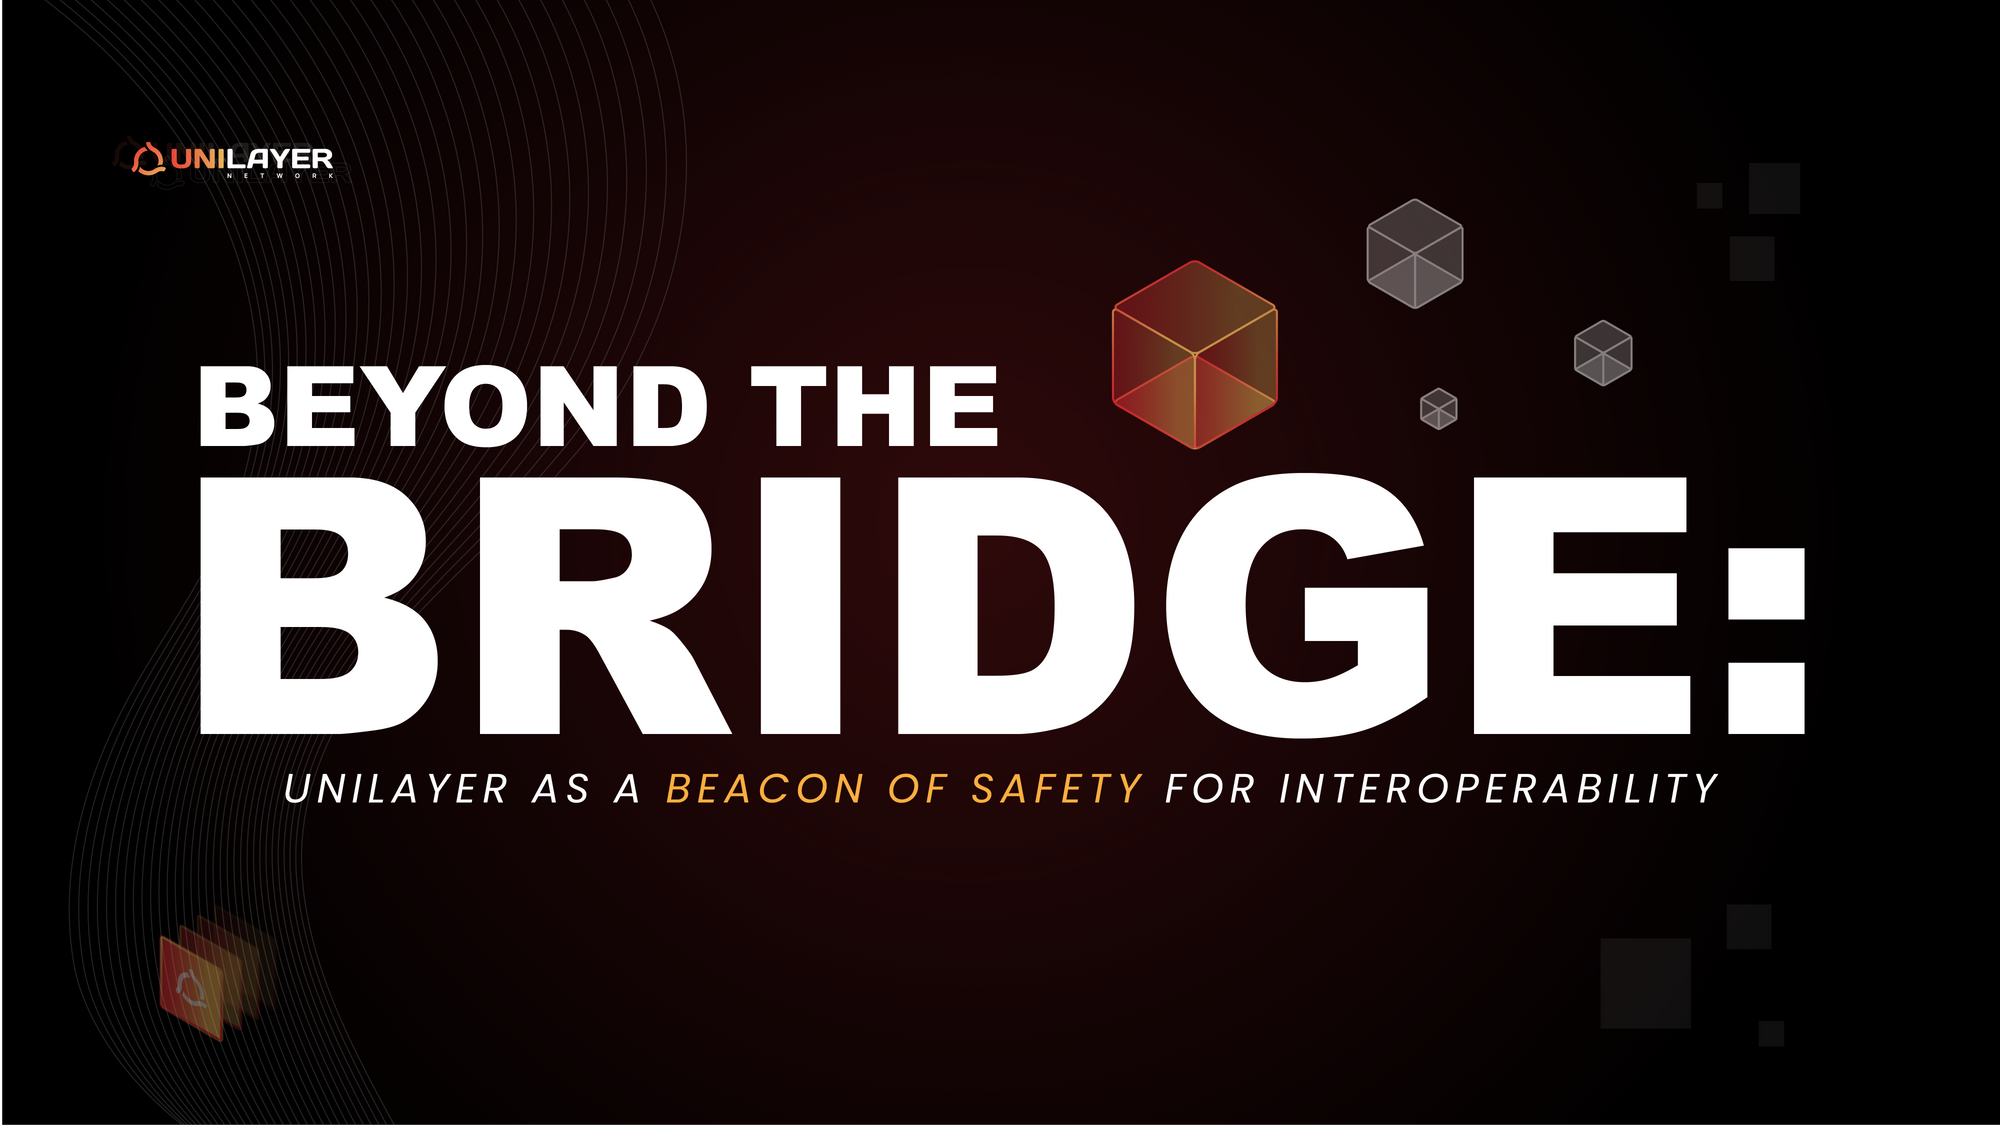 Beyond the Bridge: UniLayer as a Beacon of Safety for Interoperability